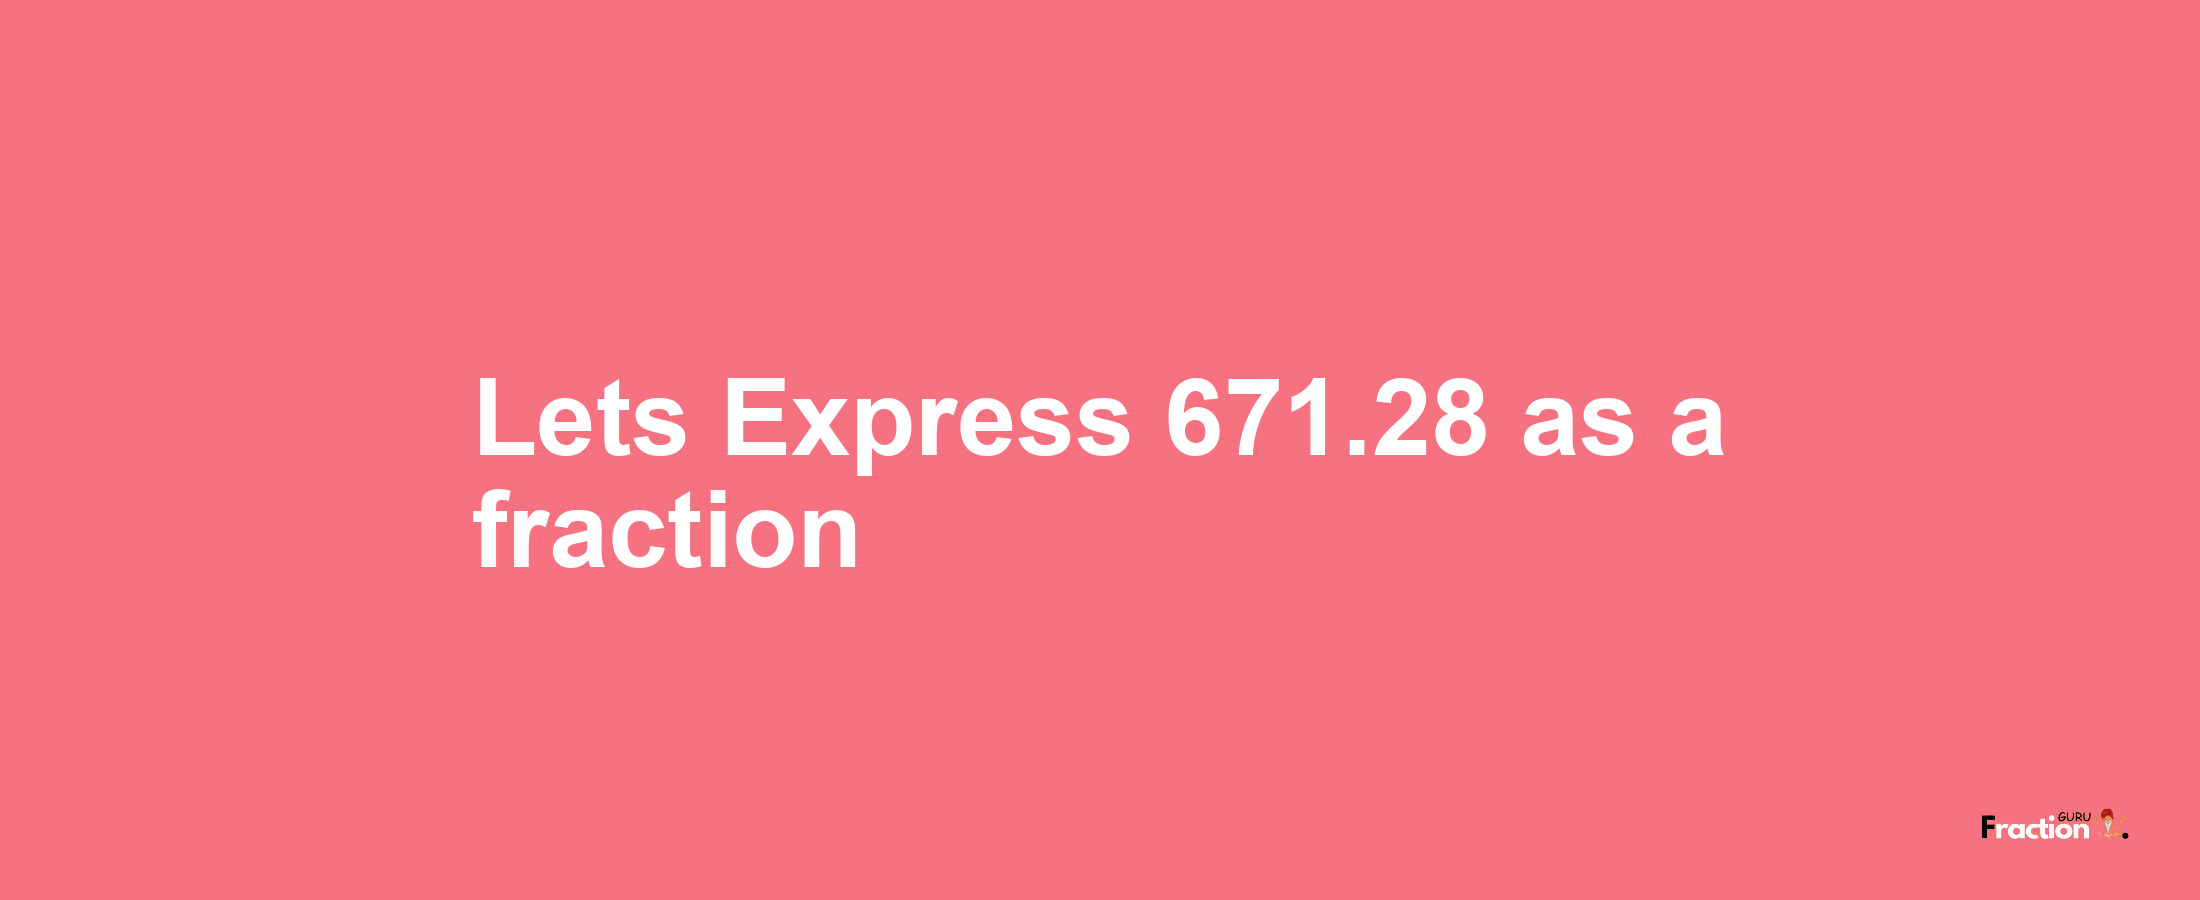 Lets Express 671.28 as afraction